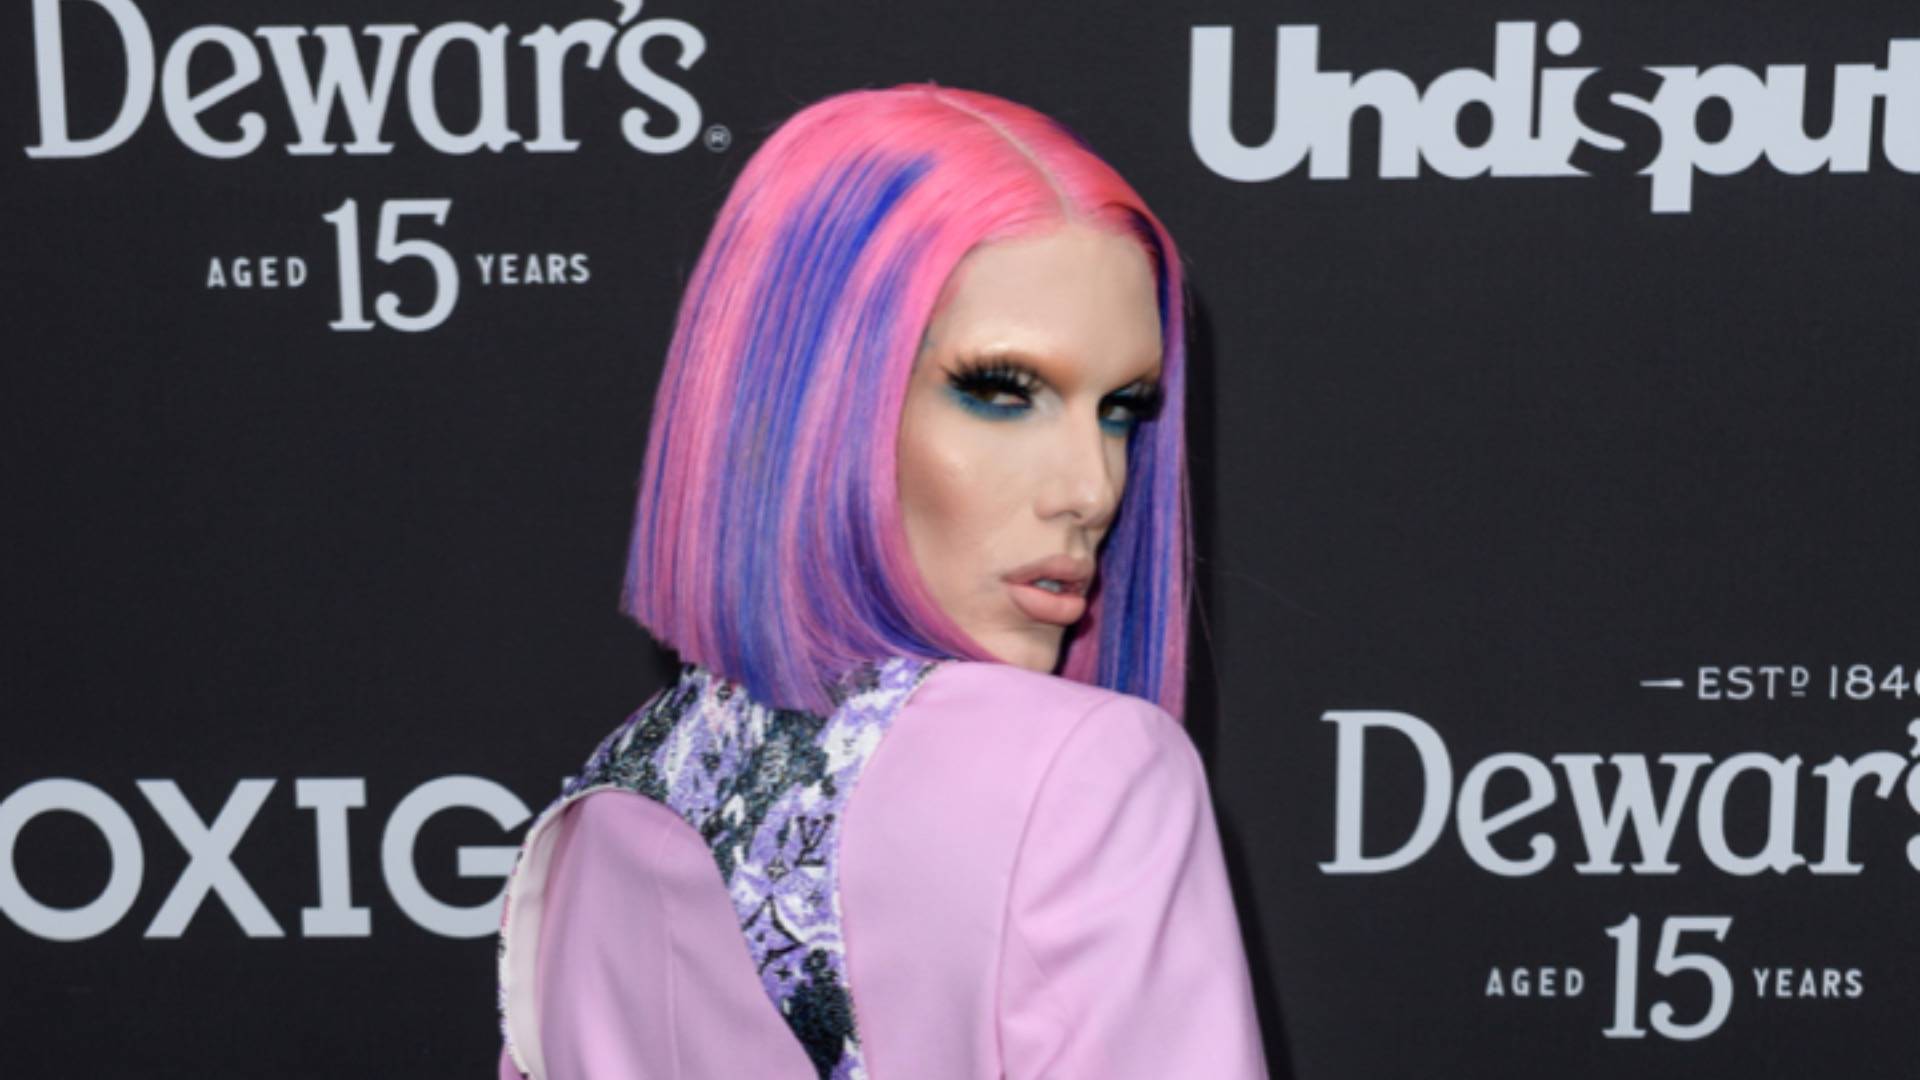 Jeffree Star posing in decorative back brace, lilac suit jacket and hair styled into a straight bob containing blue and pink streaks 